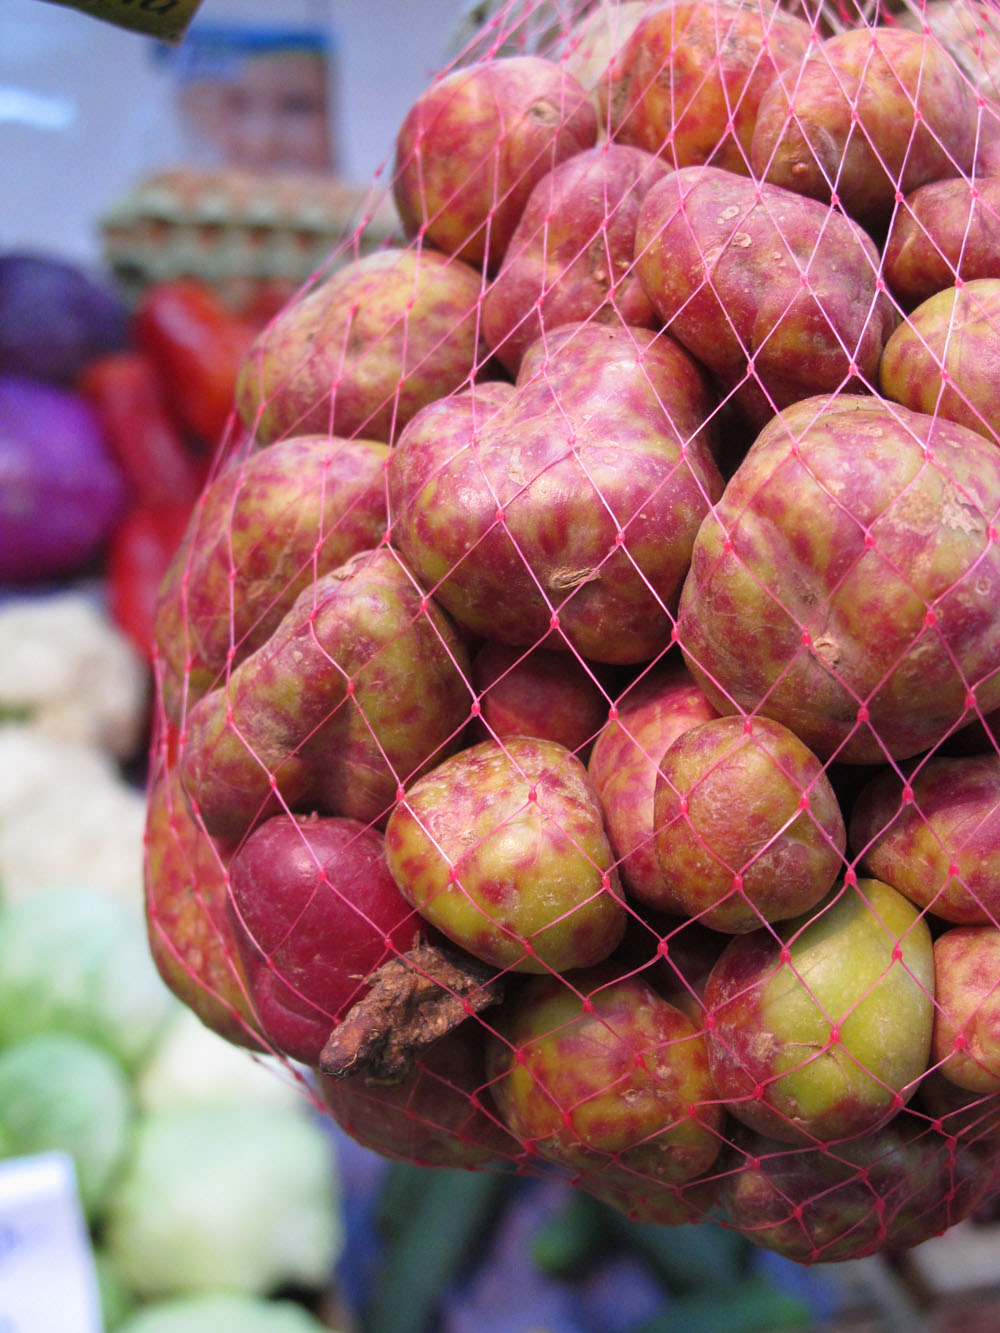 Red Potatoes in Argentina